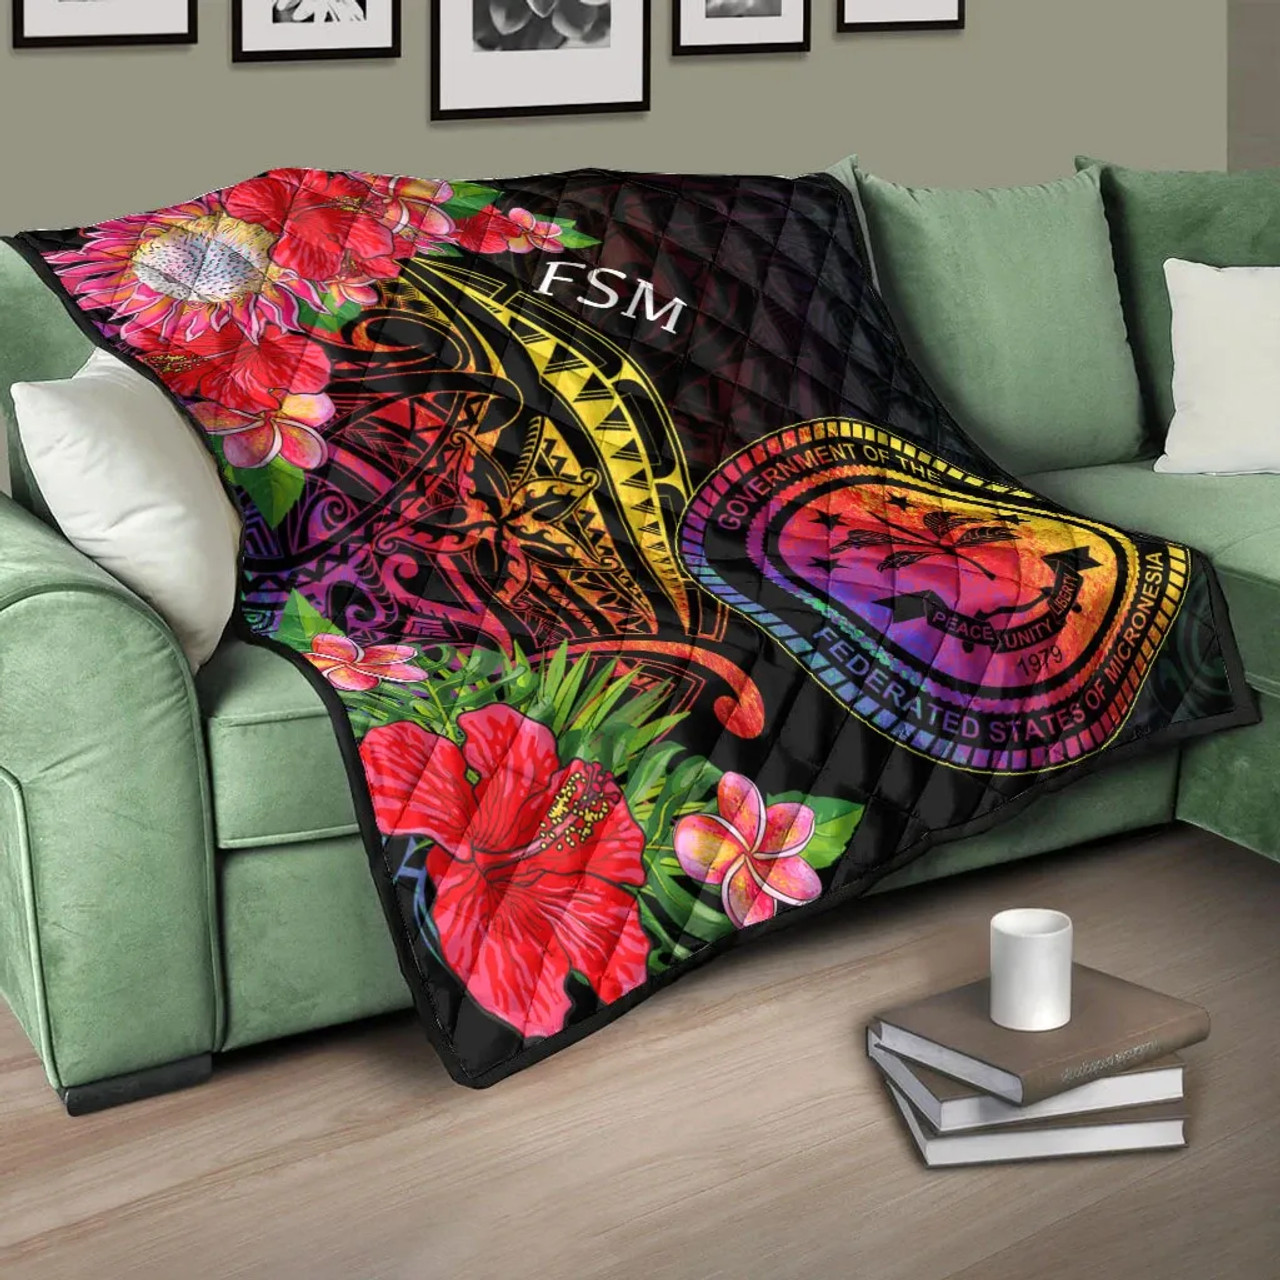 Federated States of Micronesia Premium Quilt - Tropical Hippie Style 10